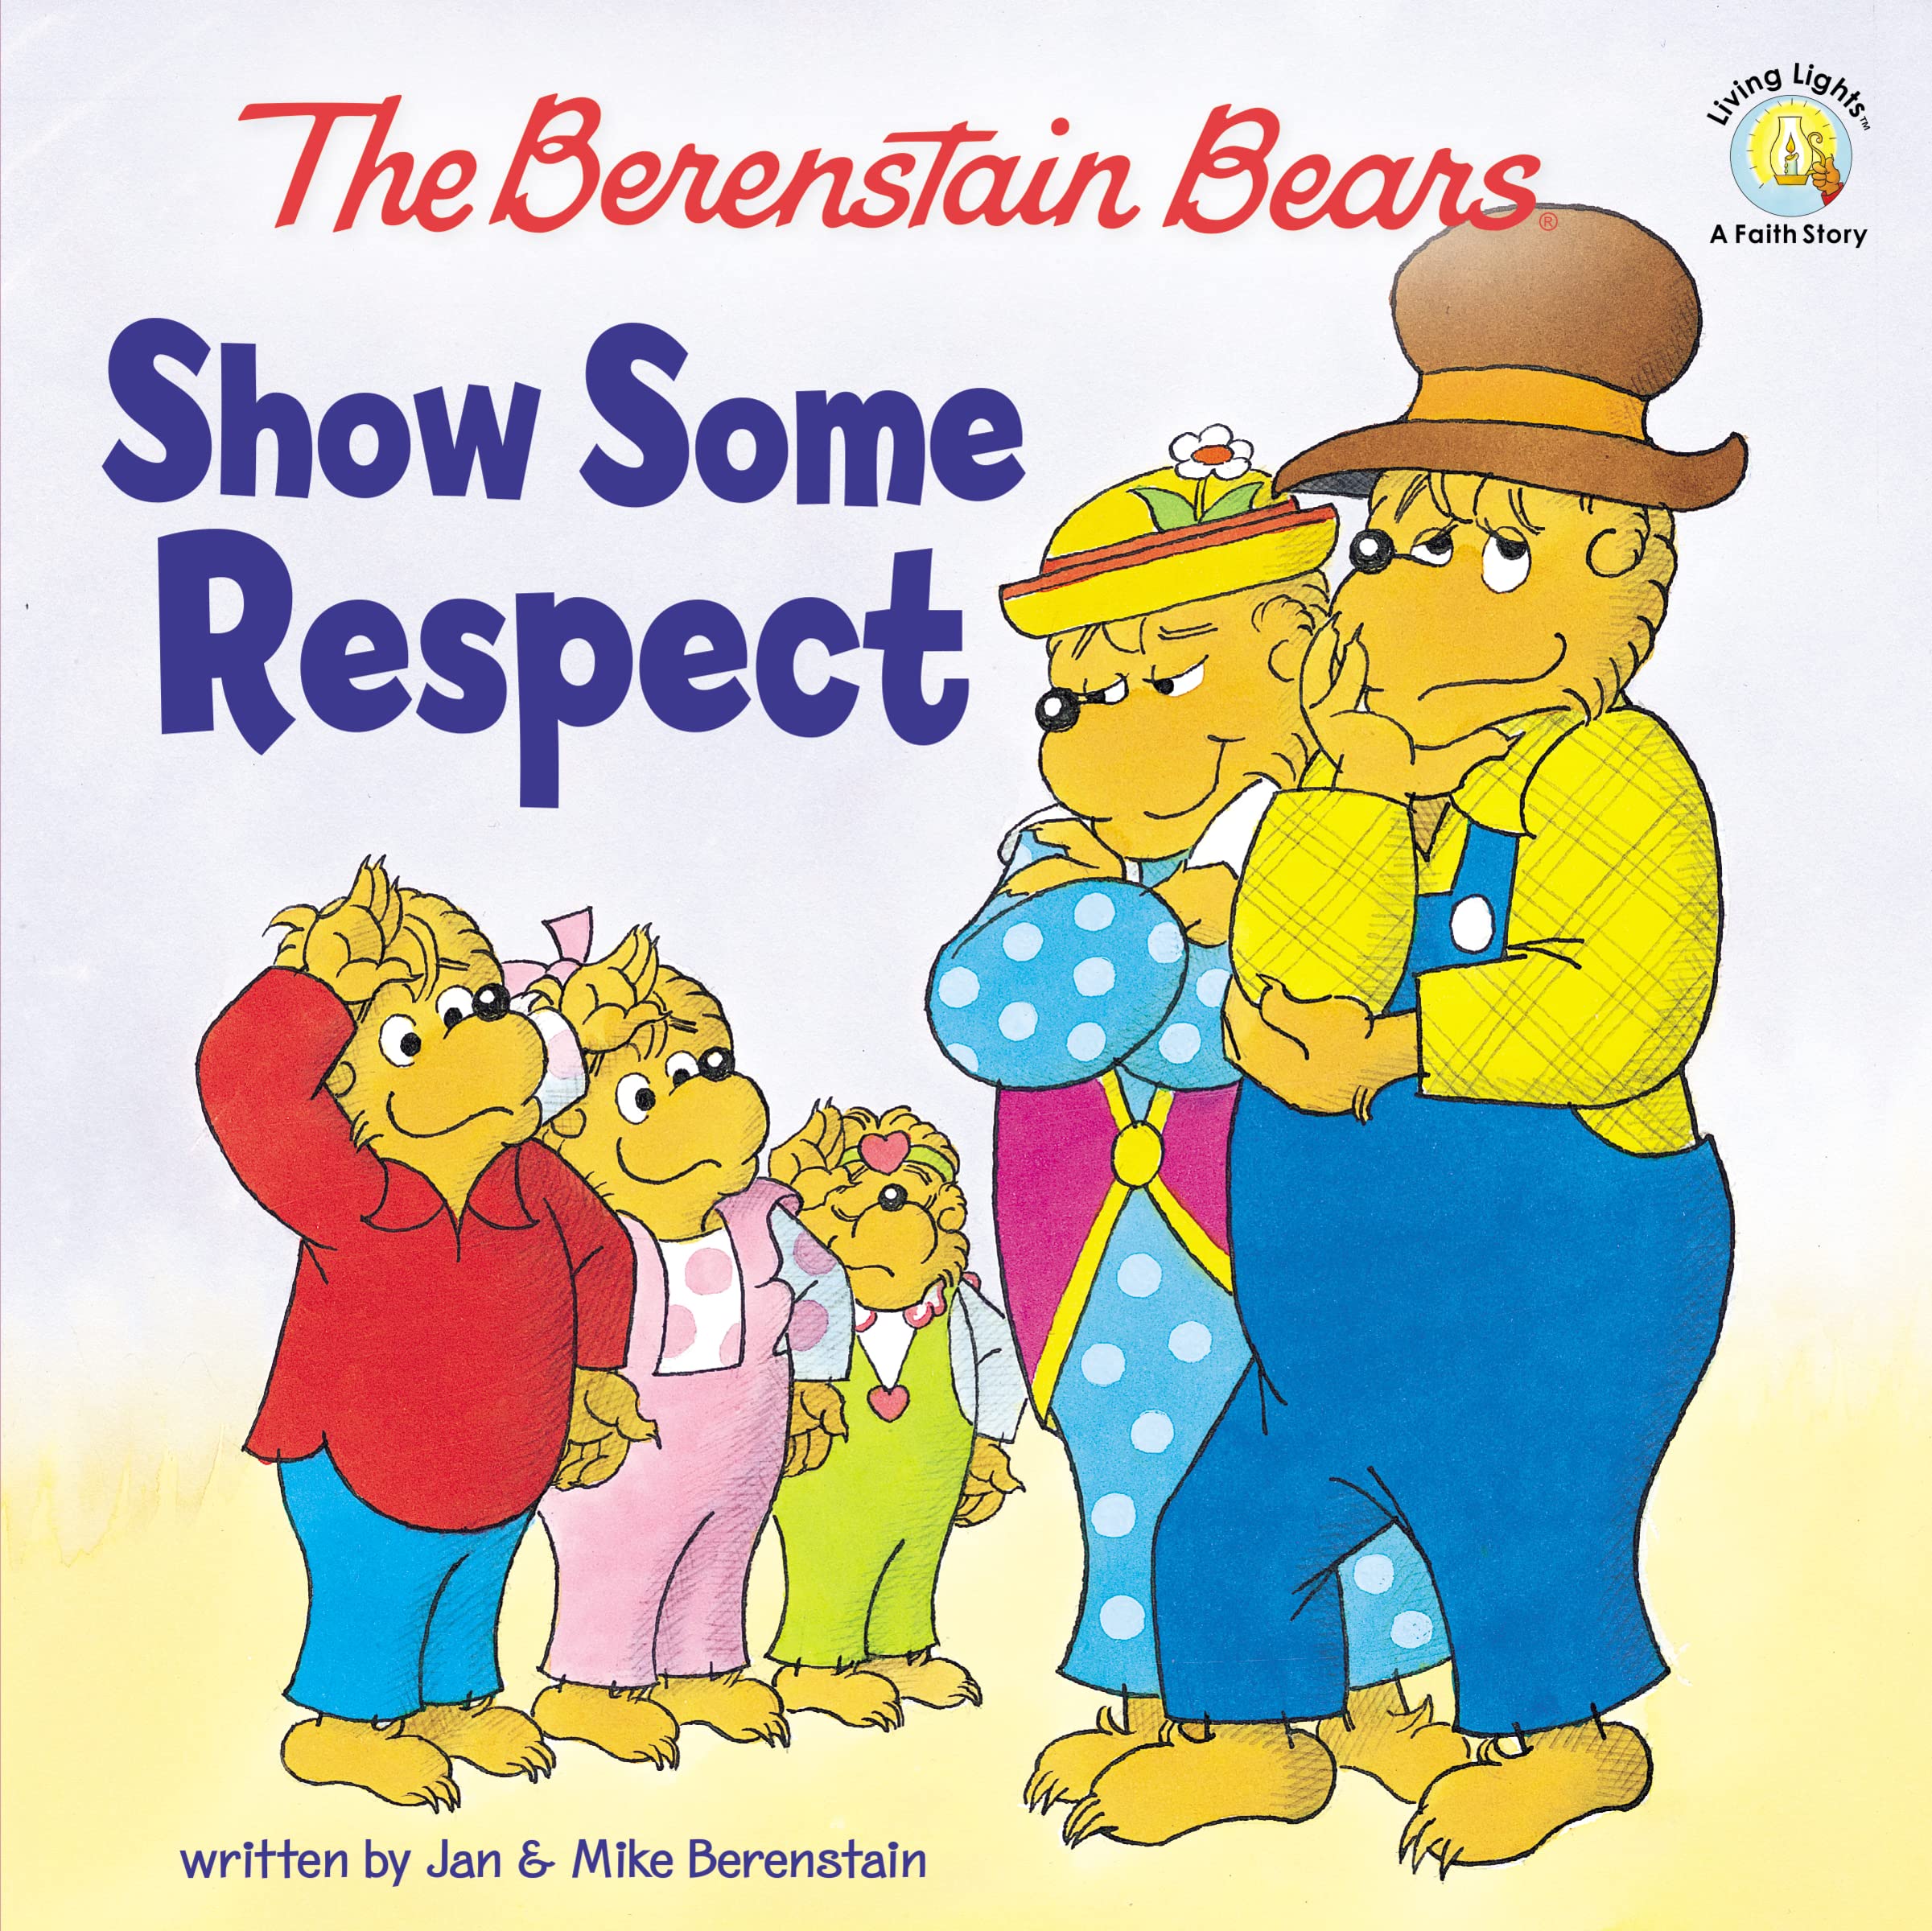 IMG : The Berenstain Bears show some respect